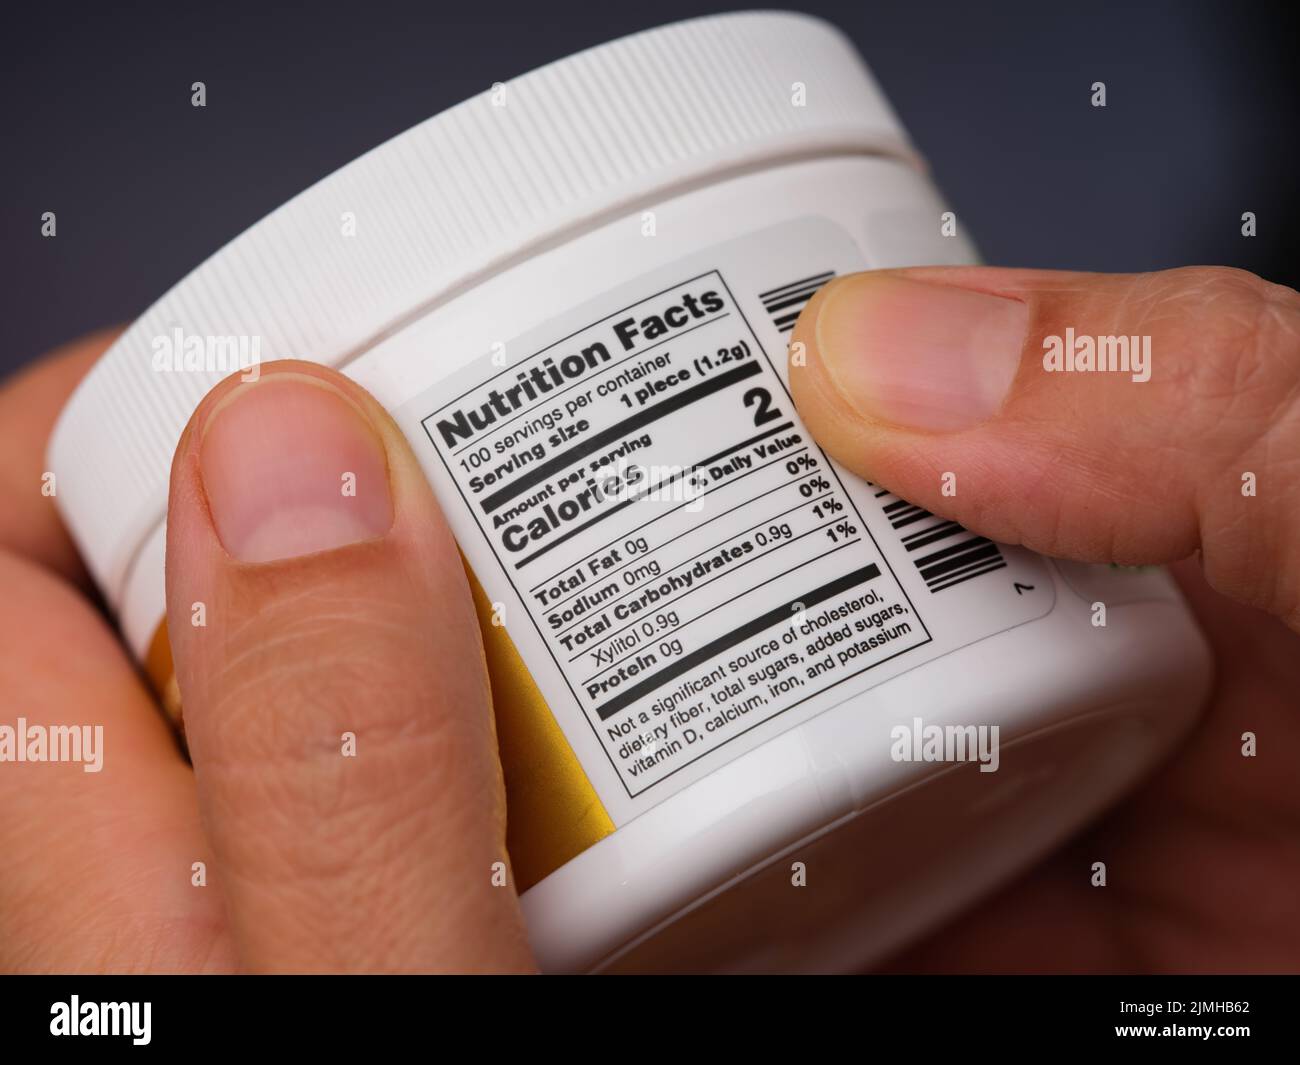 A woman holding a jar with gums and reading a Nutrition Facts label at the back. Stock Photo